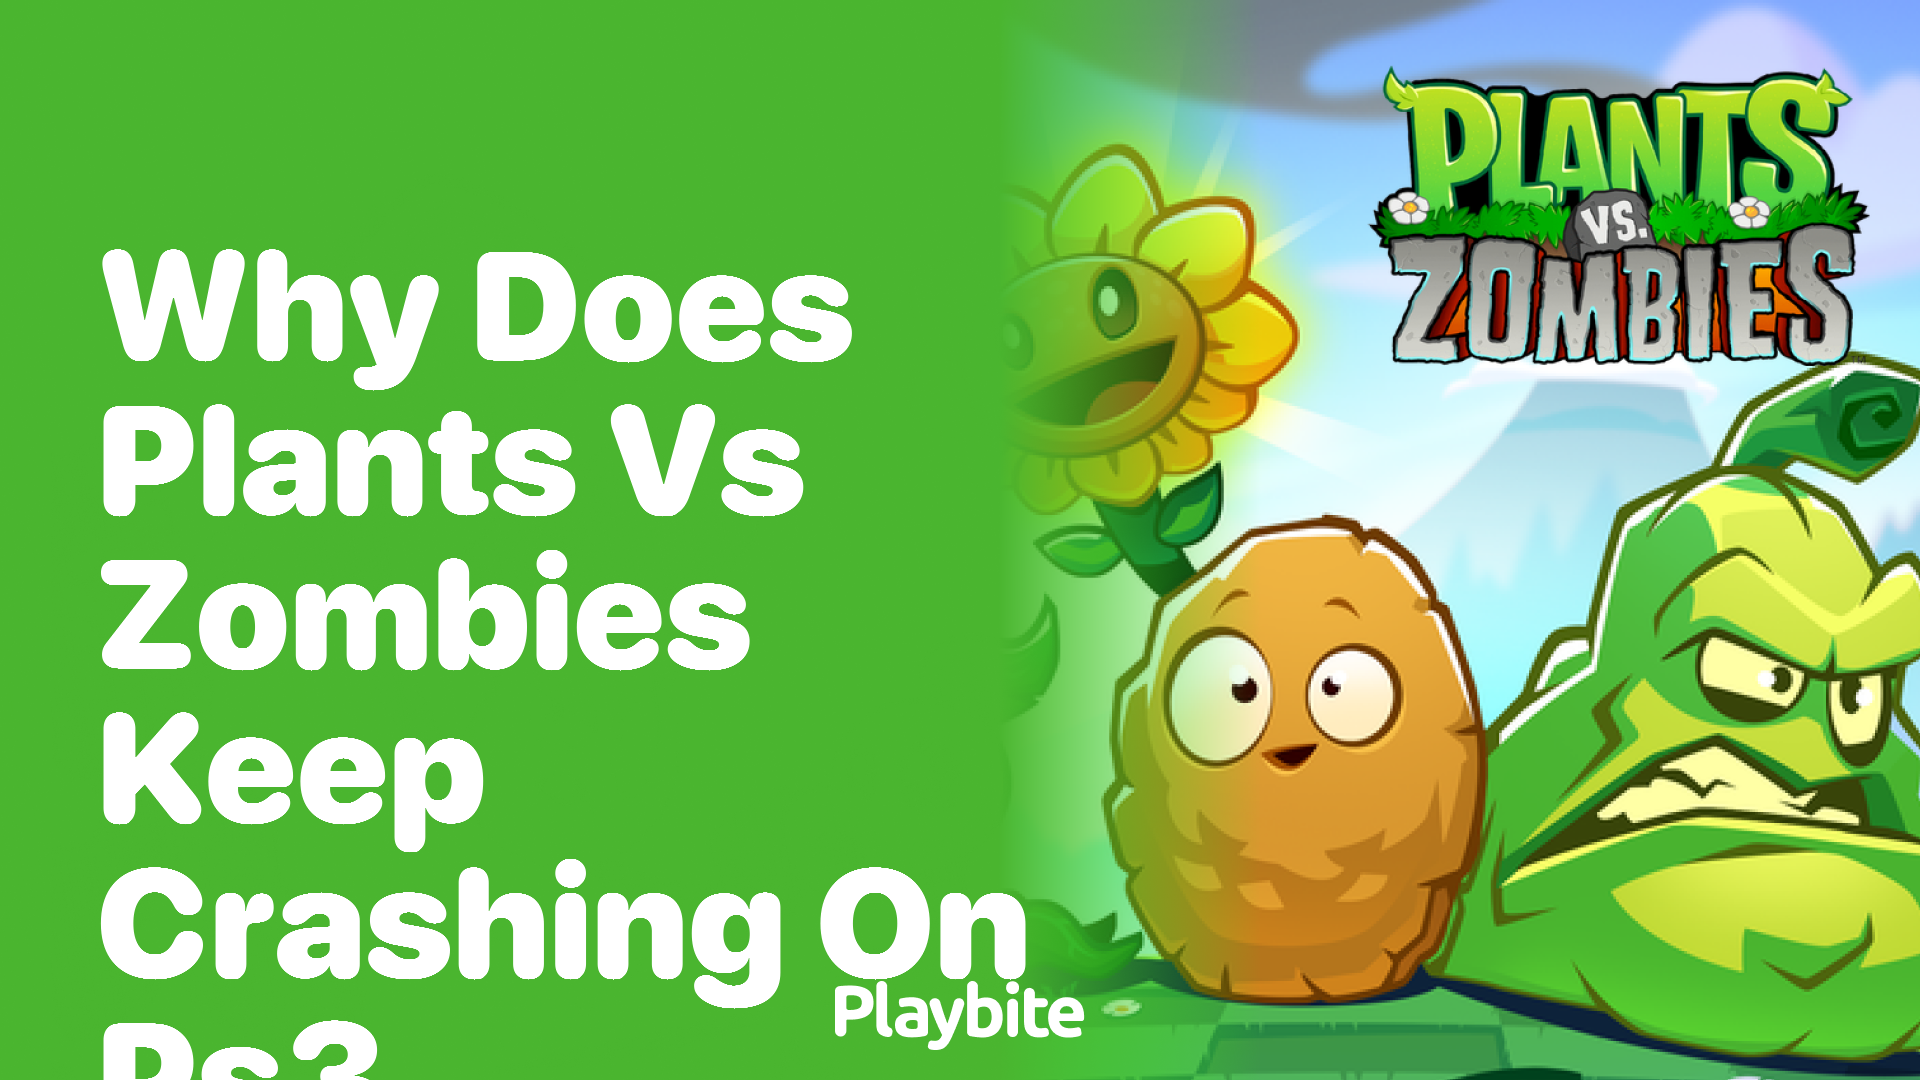 Why does Plants vs Zombies keep crashing on PS3?